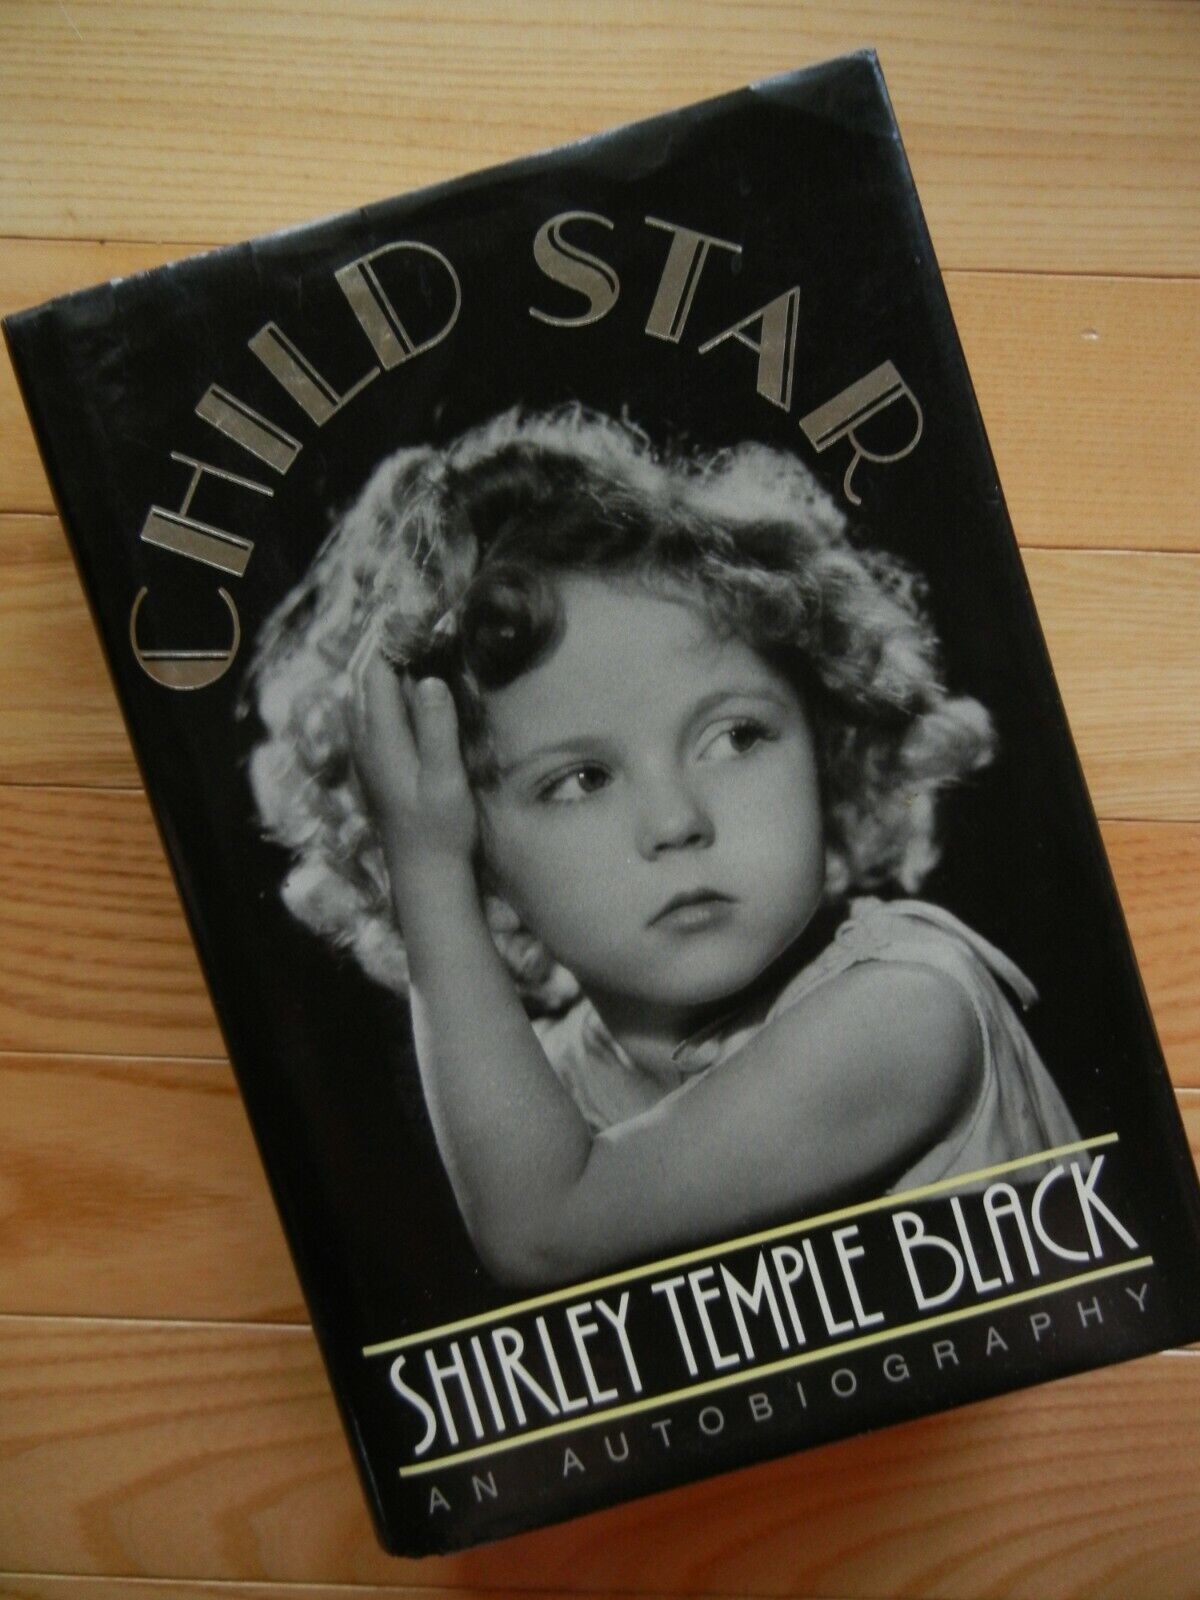 Shirley Temple Collector Stamp Panels 96 pages + auto-bio book +Heidi Movie Tape Grote waarde, populariteit?